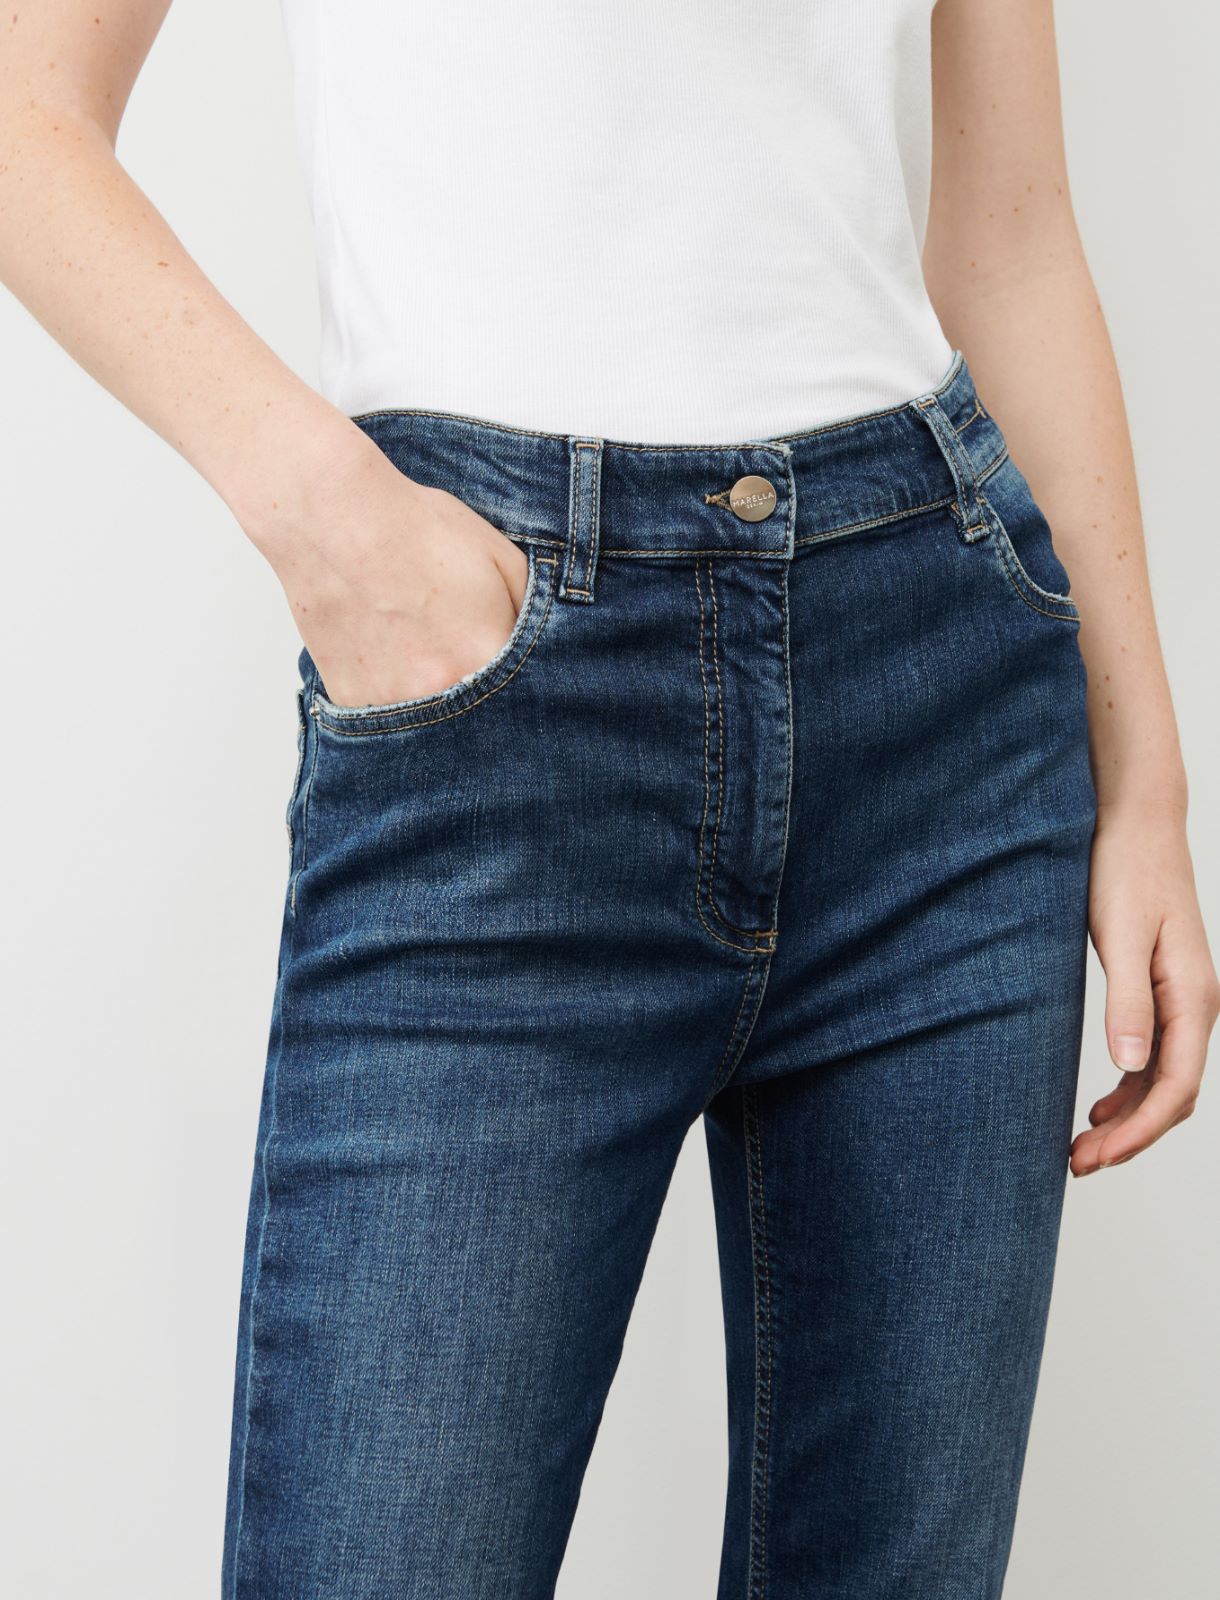 Jeans flare - Blue jeans - Marella - 4